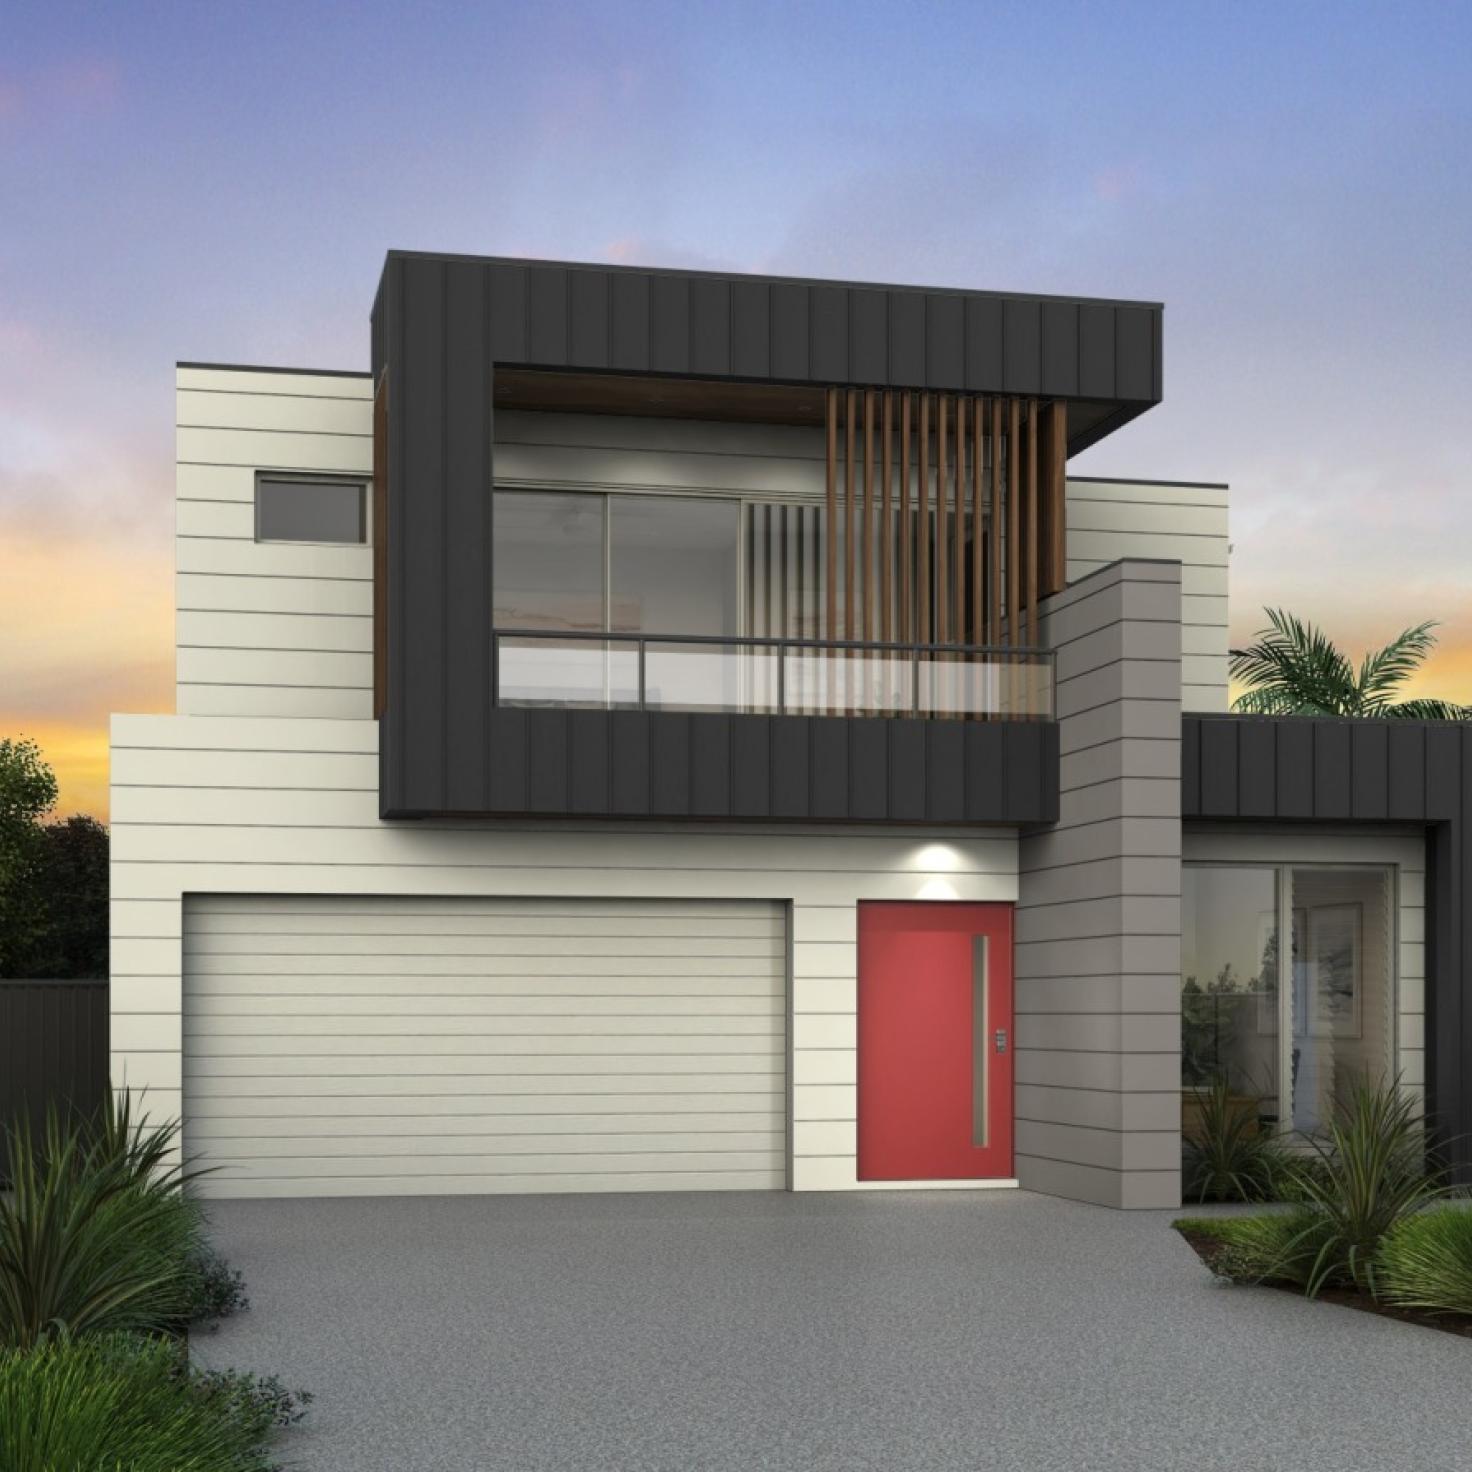 COLORBOND® steel Visualiser.  Podium. Typical of modern 2 storey homes designed to take advantage of narrow blocks this style allows you the freedom to add a variation of building materials.